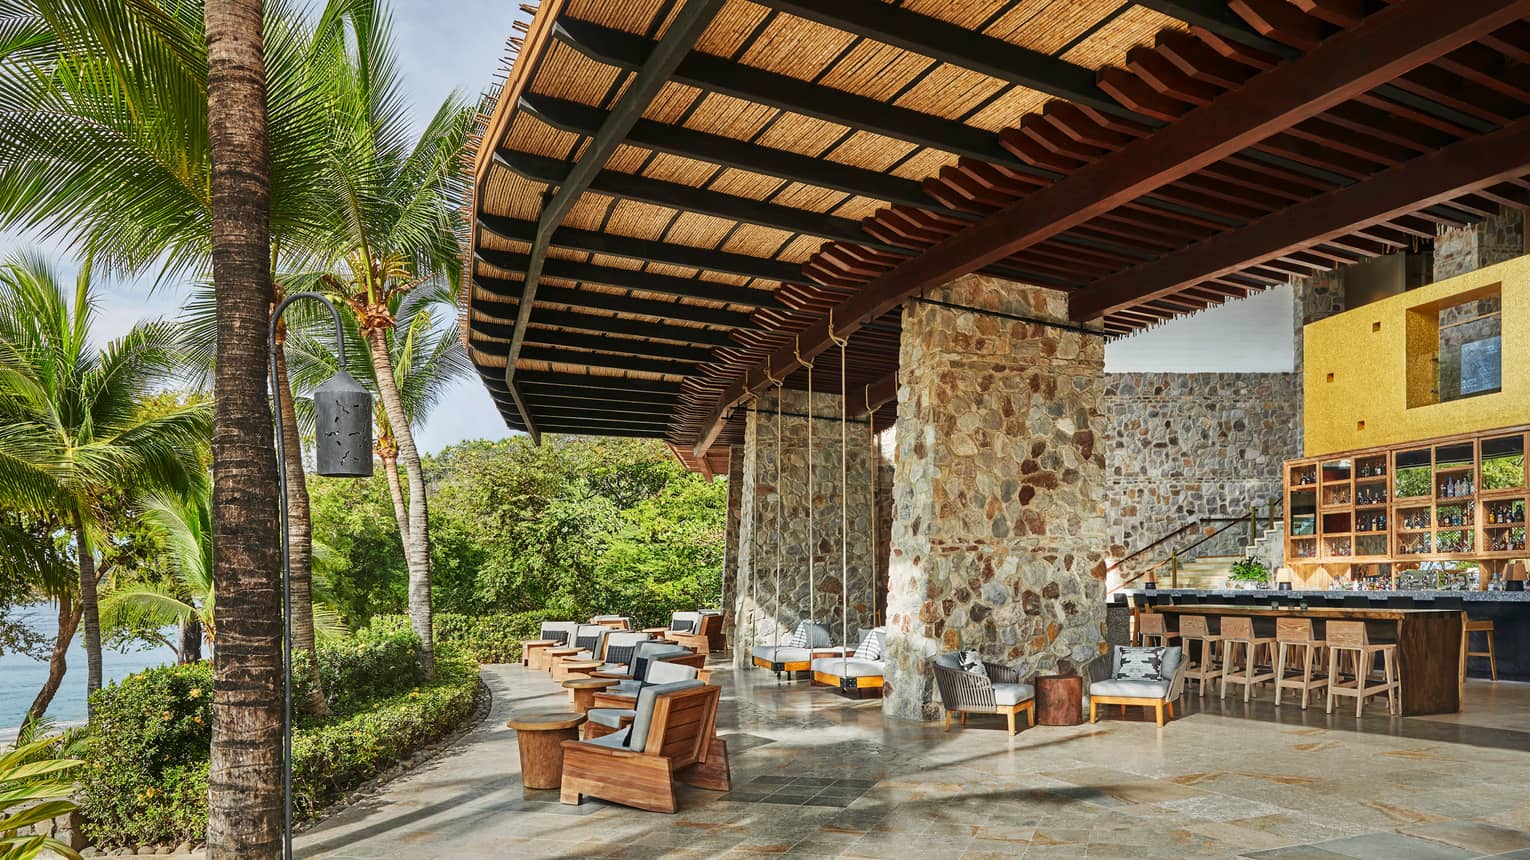 Anejo bar under large stone pillars, curved rattan roof over lounge chairs looking out at palms